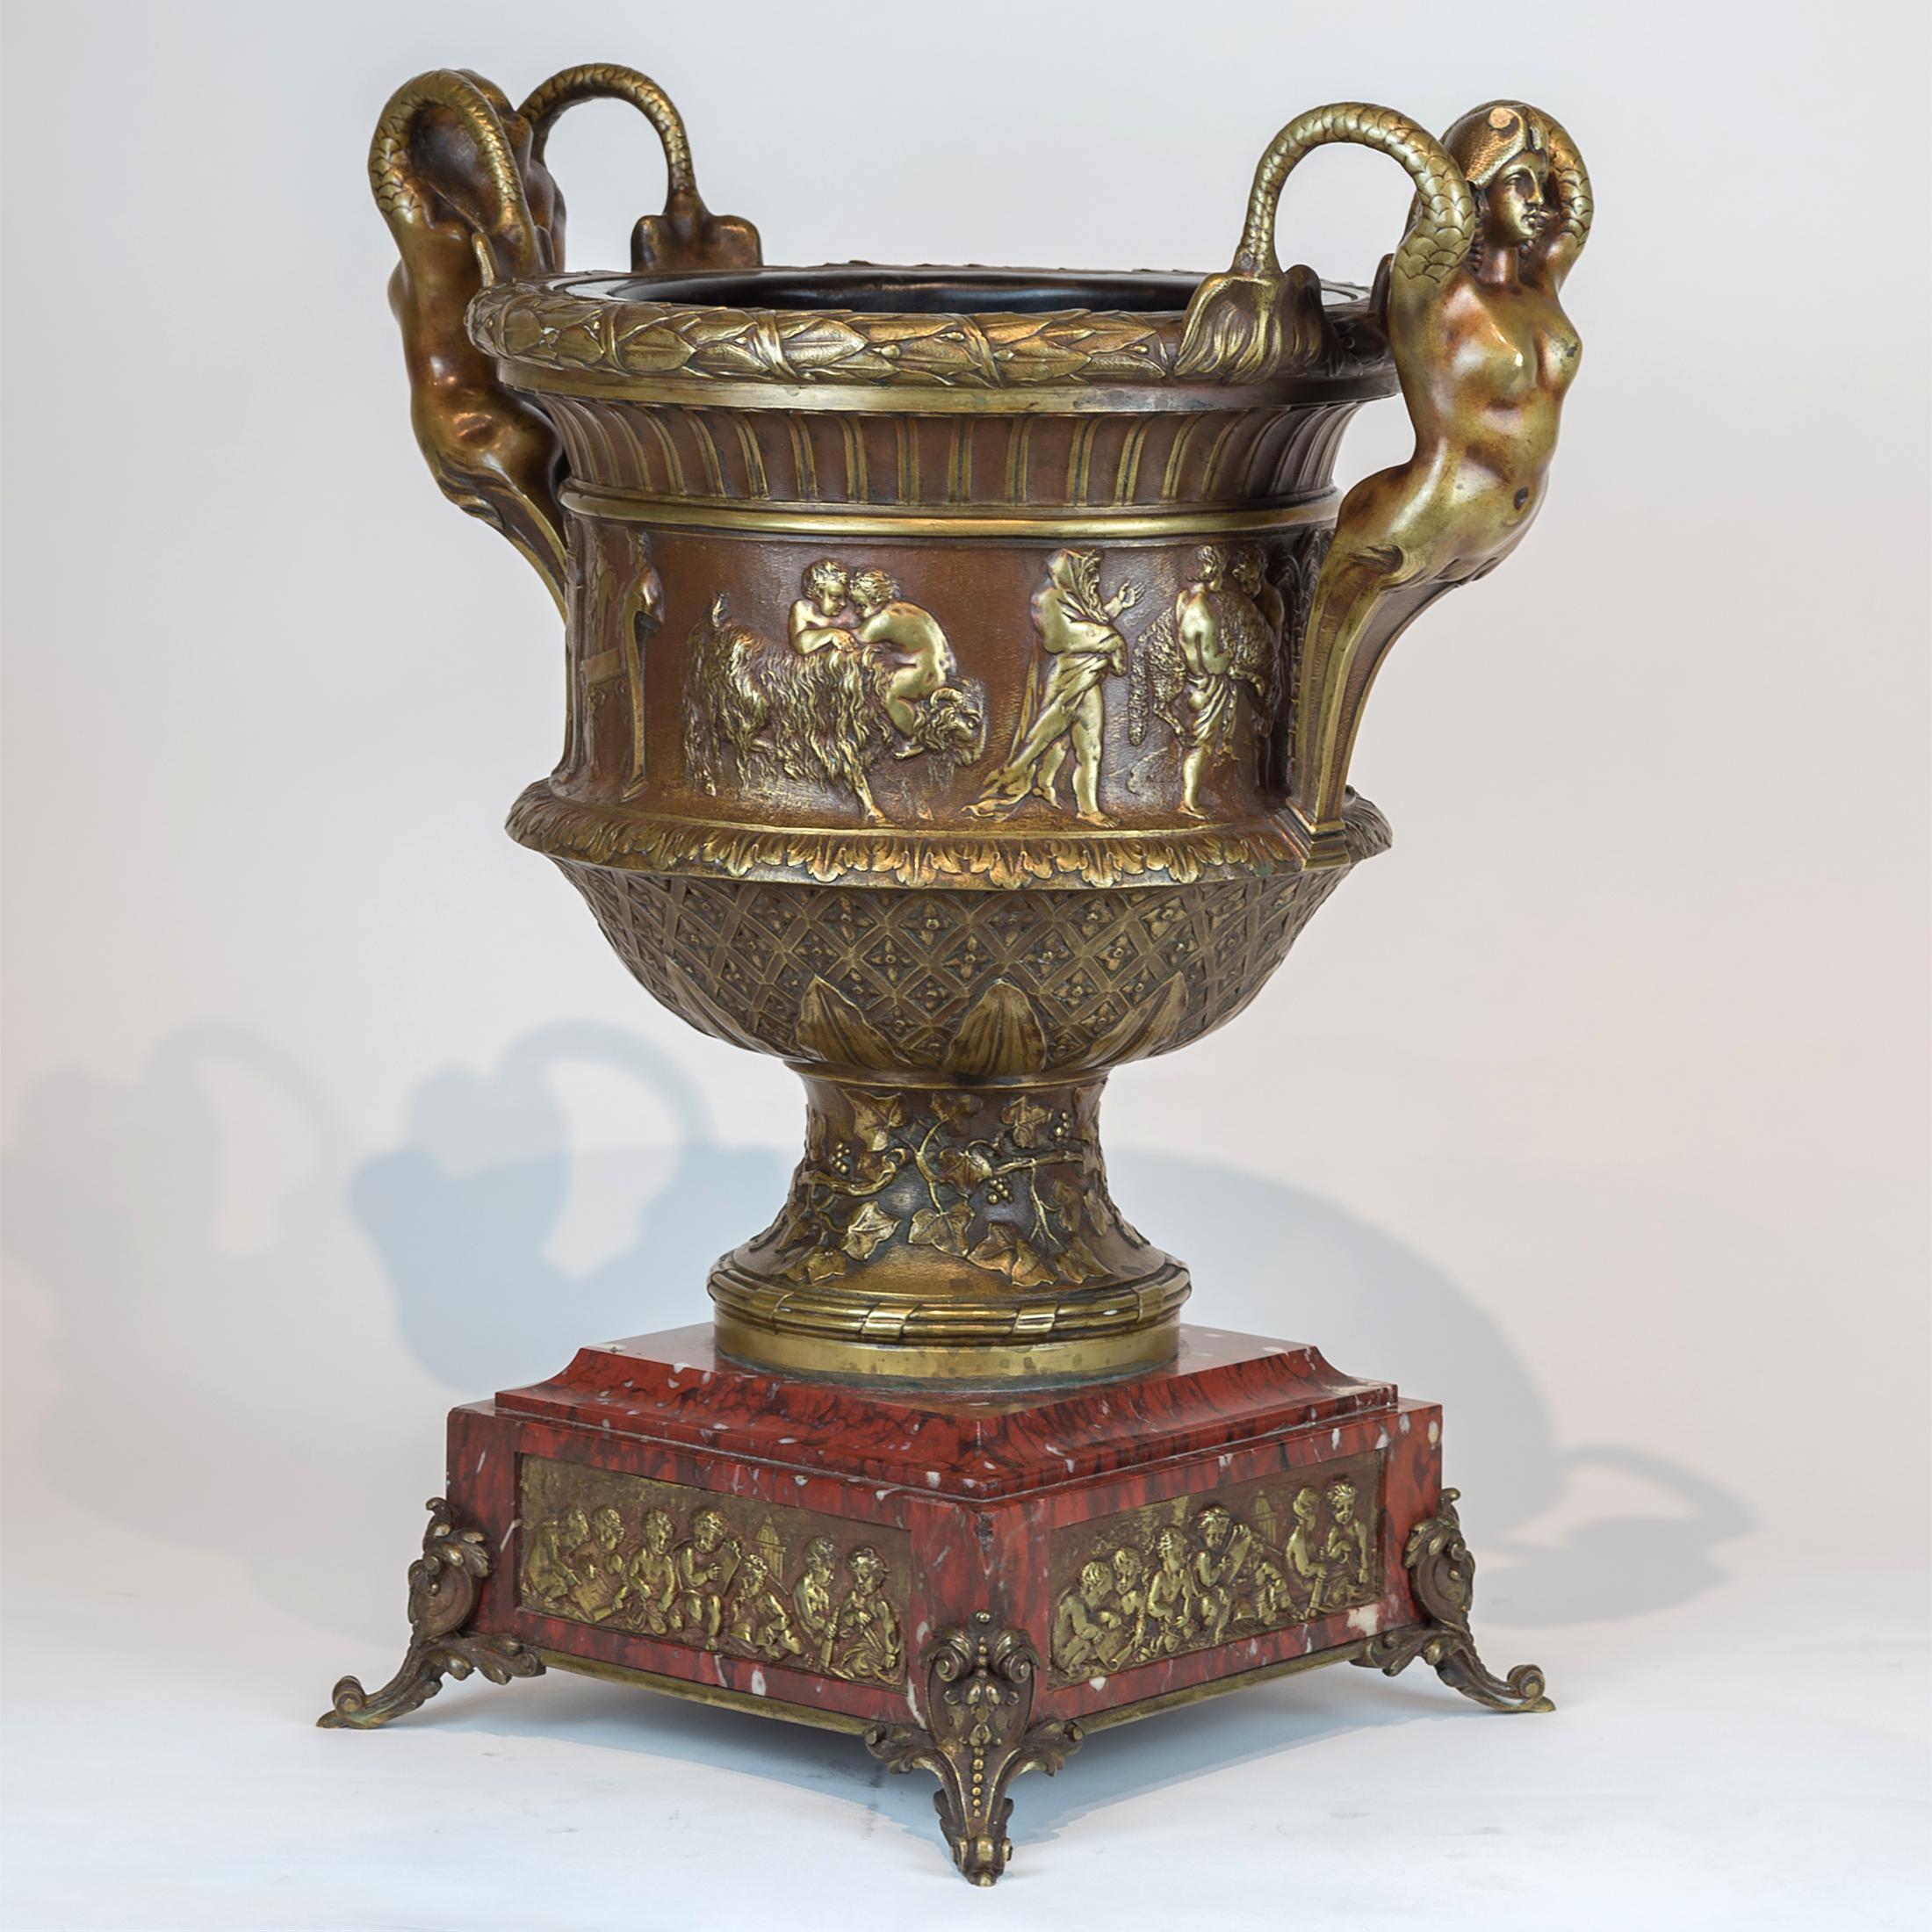 A very fine quality Renaissance-style bronze centrepiece vase with Mermaid handles surmounted on a square rouge marble. Finely casted with acanthus leaf and allegorical scene. 

Origin: French
Date: 19th century
Dimension: 18 3/4 in x 16 1/2 in.